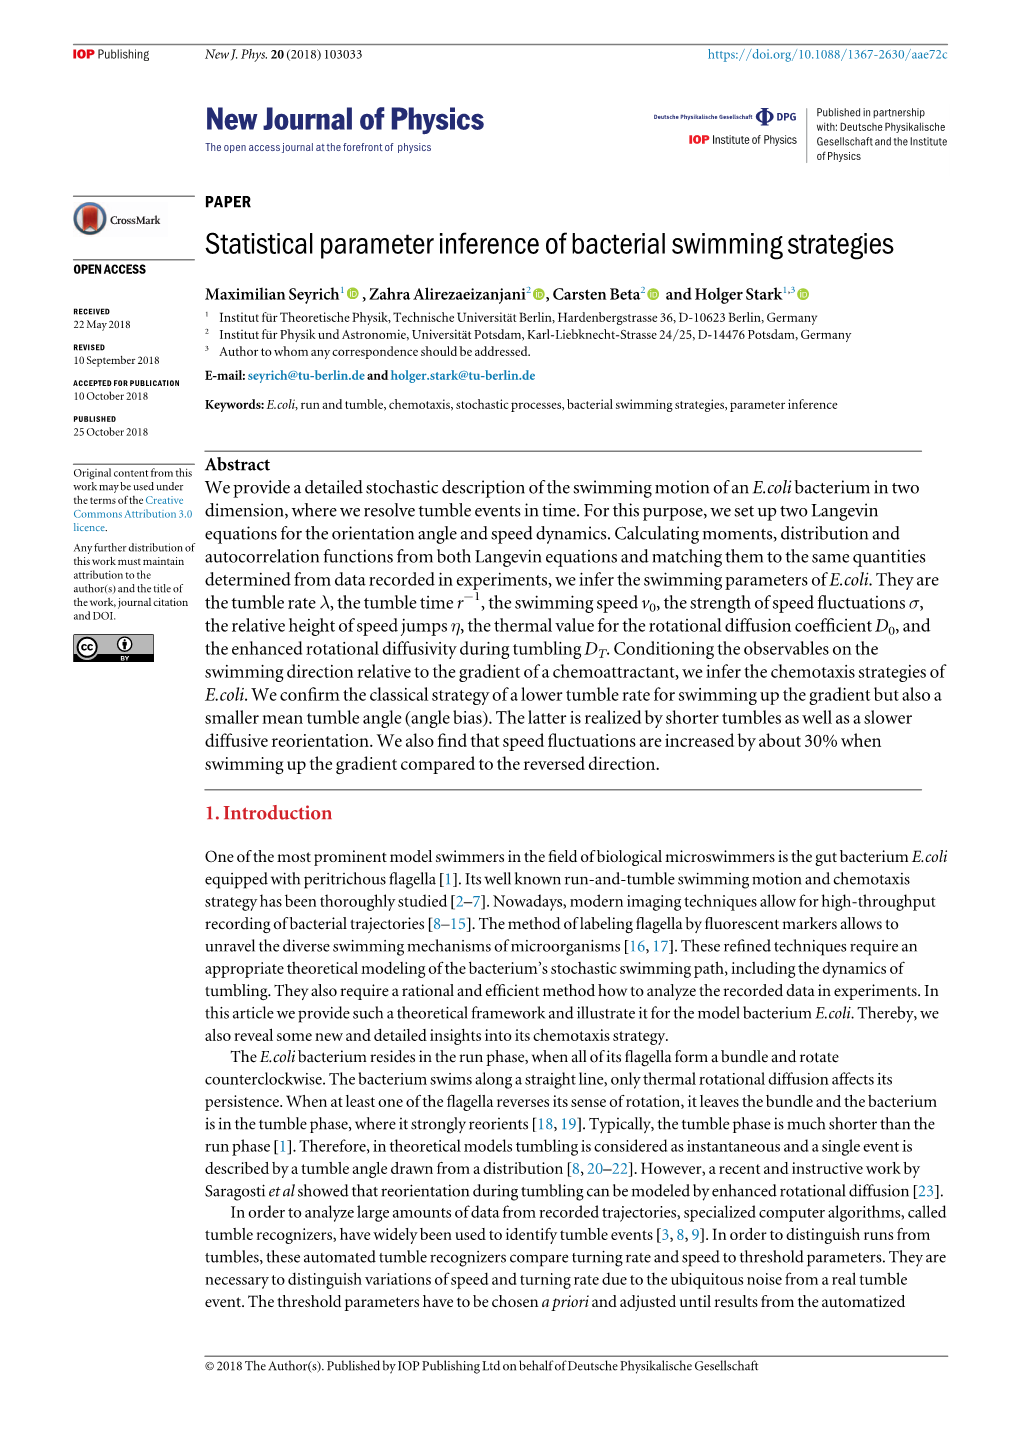 Statistical Parameter Inference of Bacterial Swimming Strategies